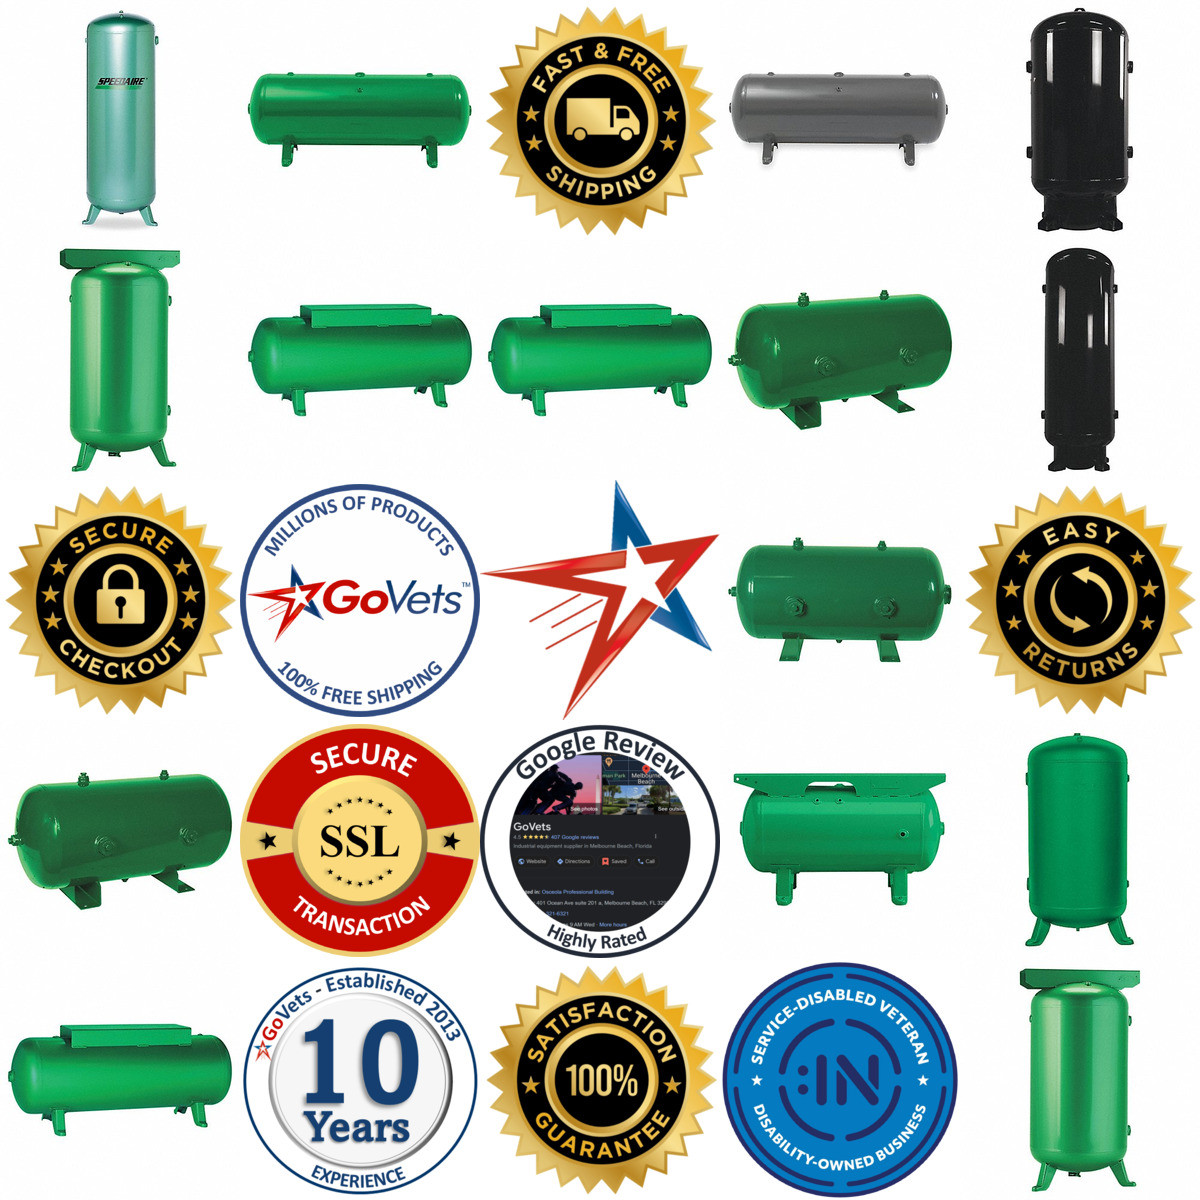 A selection of Stationary Air Tanks products on GoVets